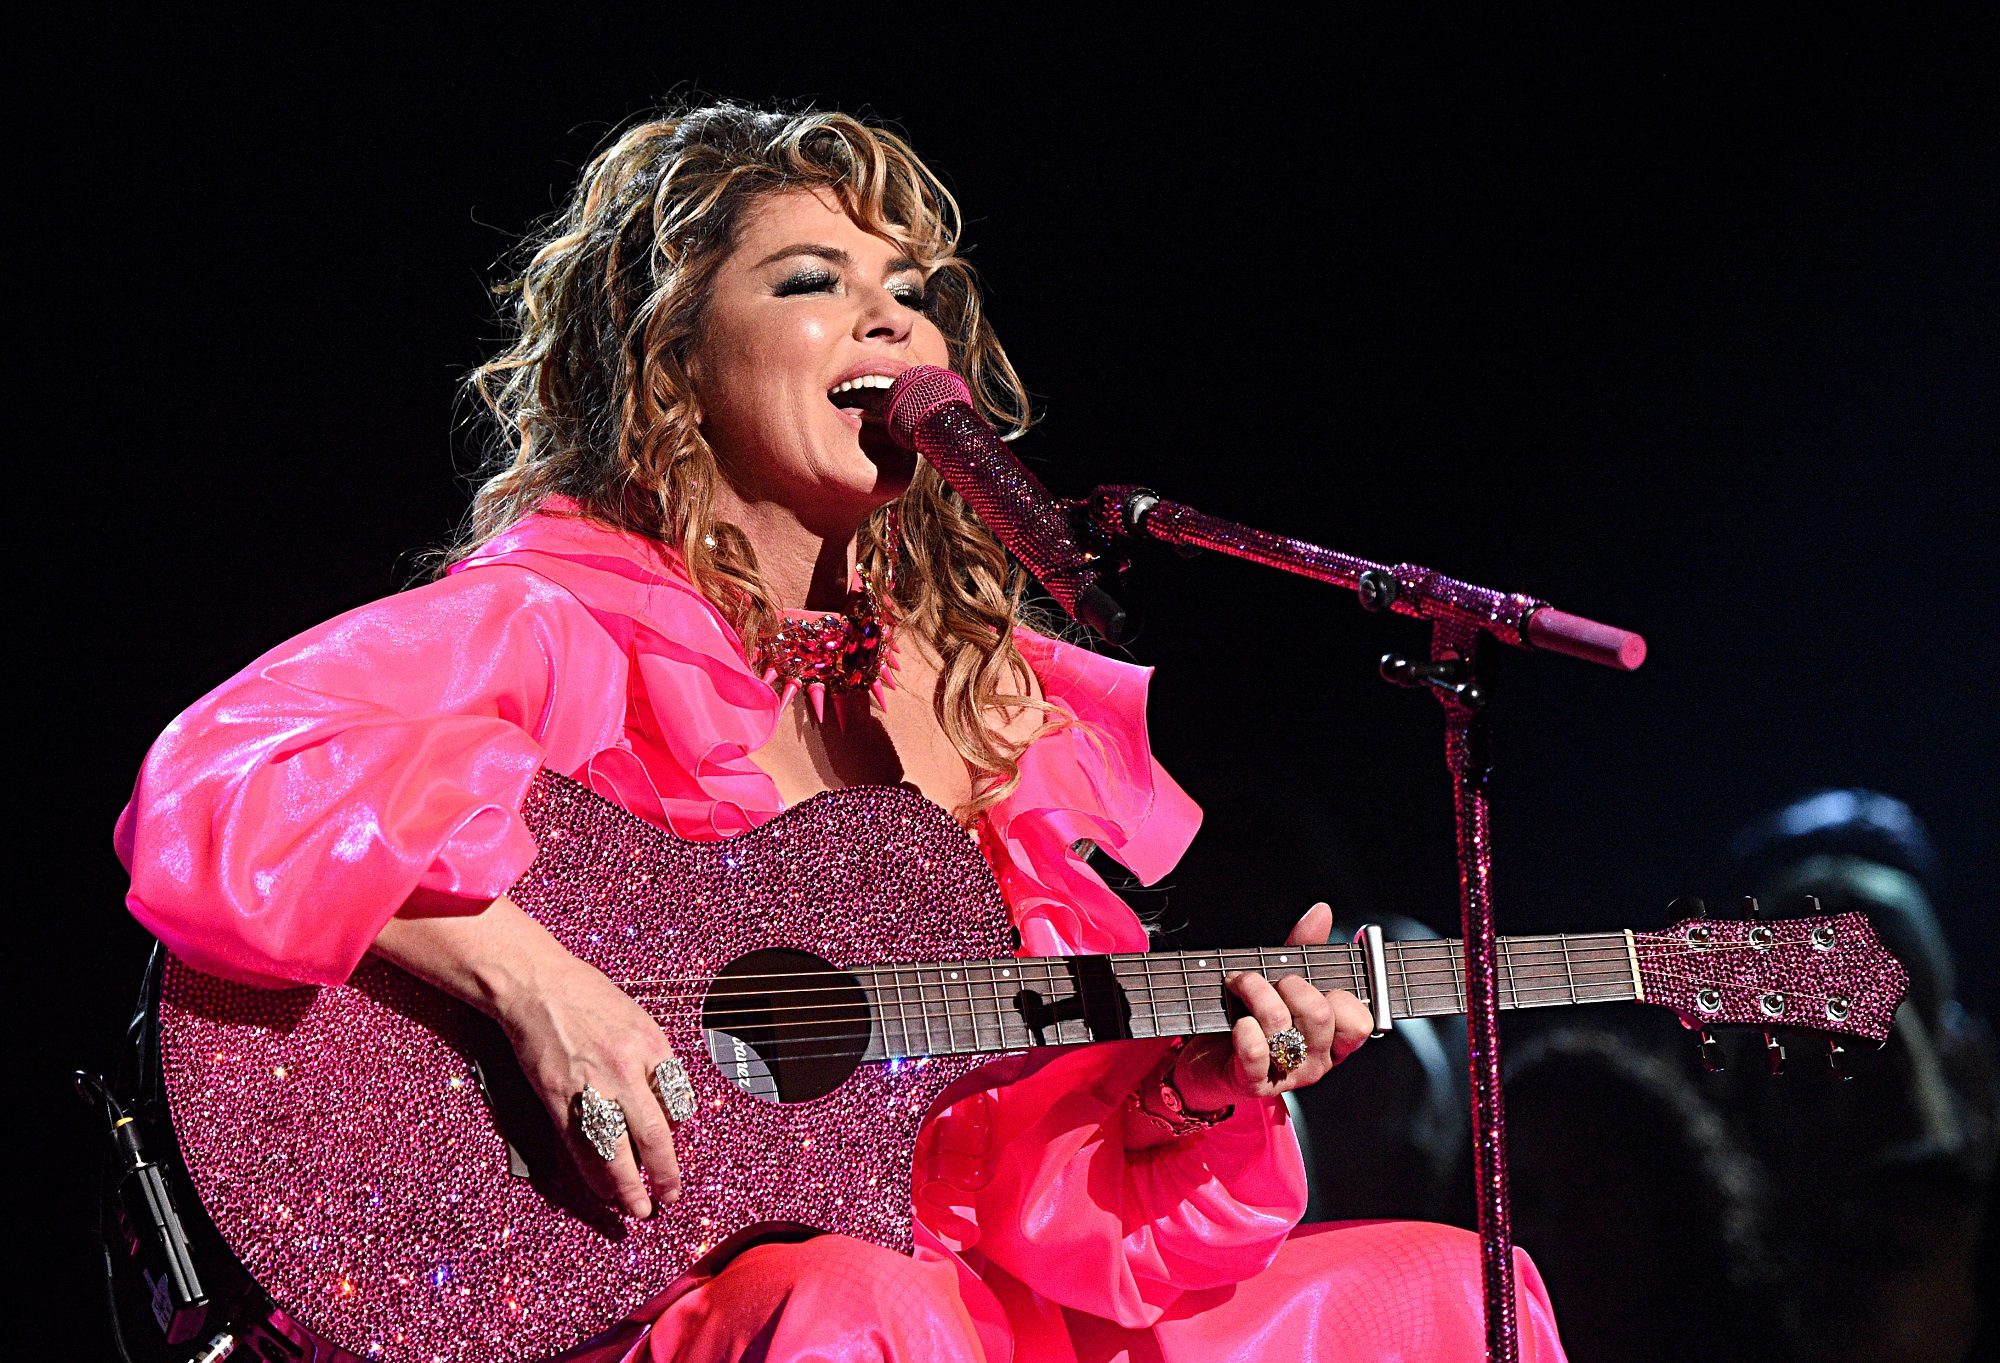 Shania Twain performs during the 2019 American Music Awards